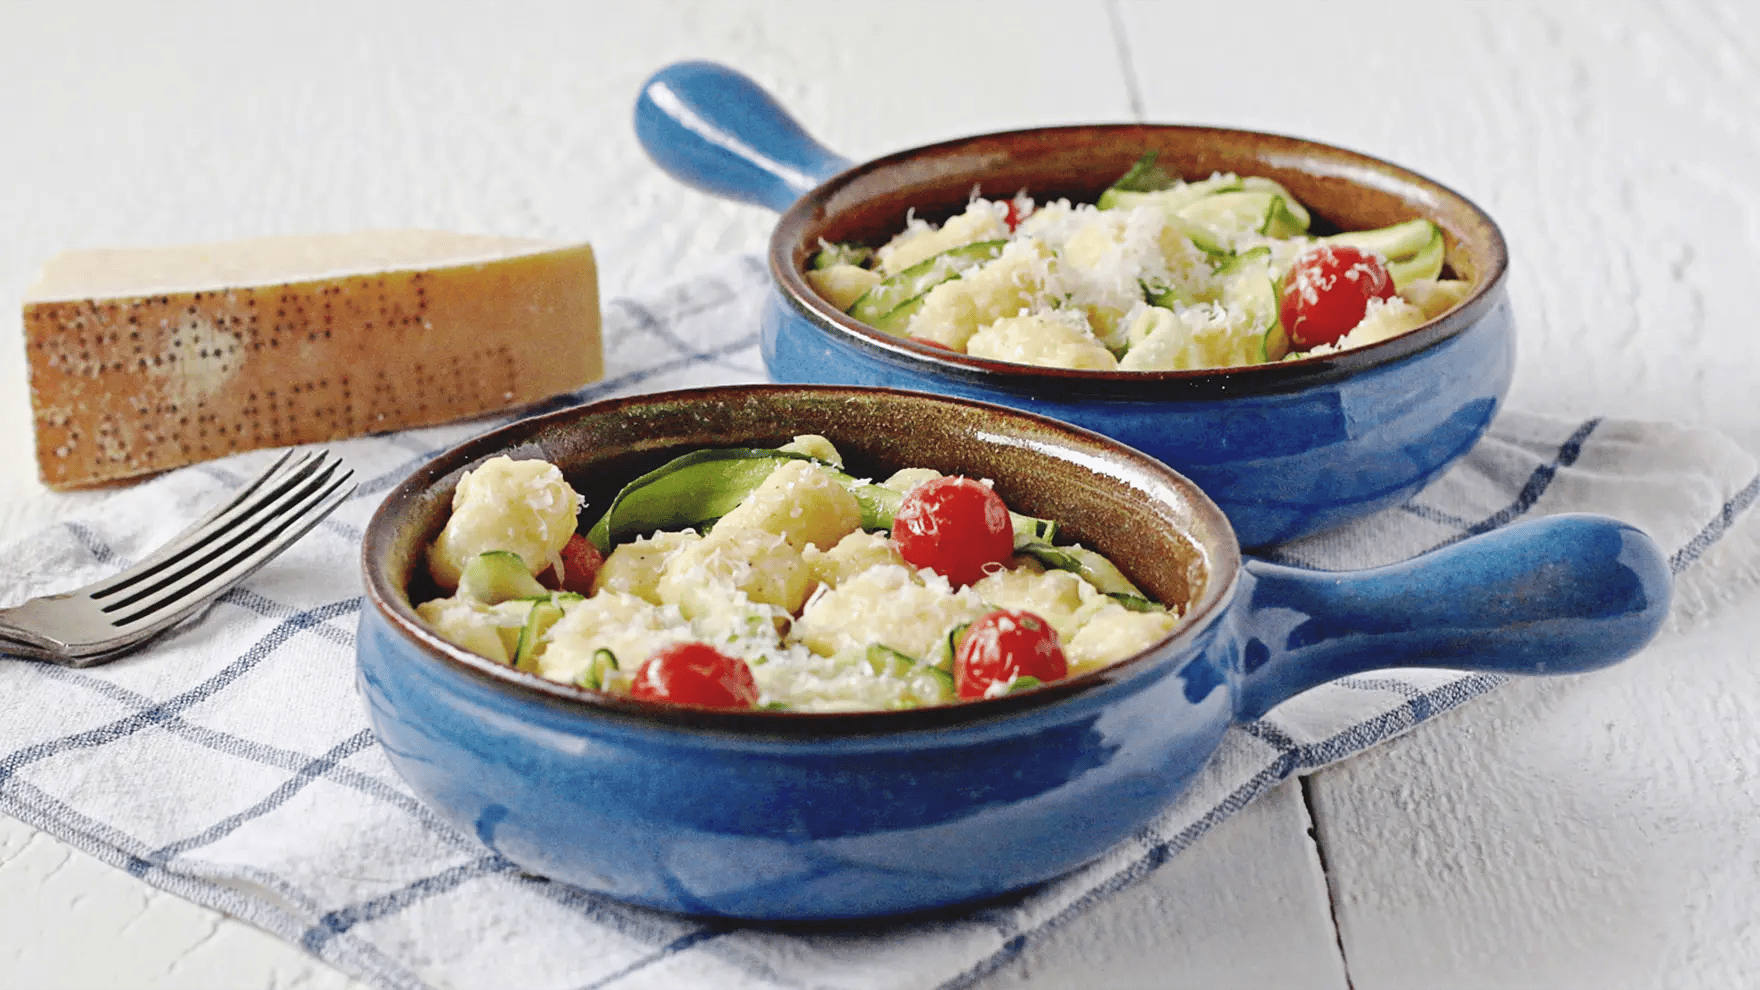 Two bowls with gnocchi, zucchini, and tomatoes on tablecloth.